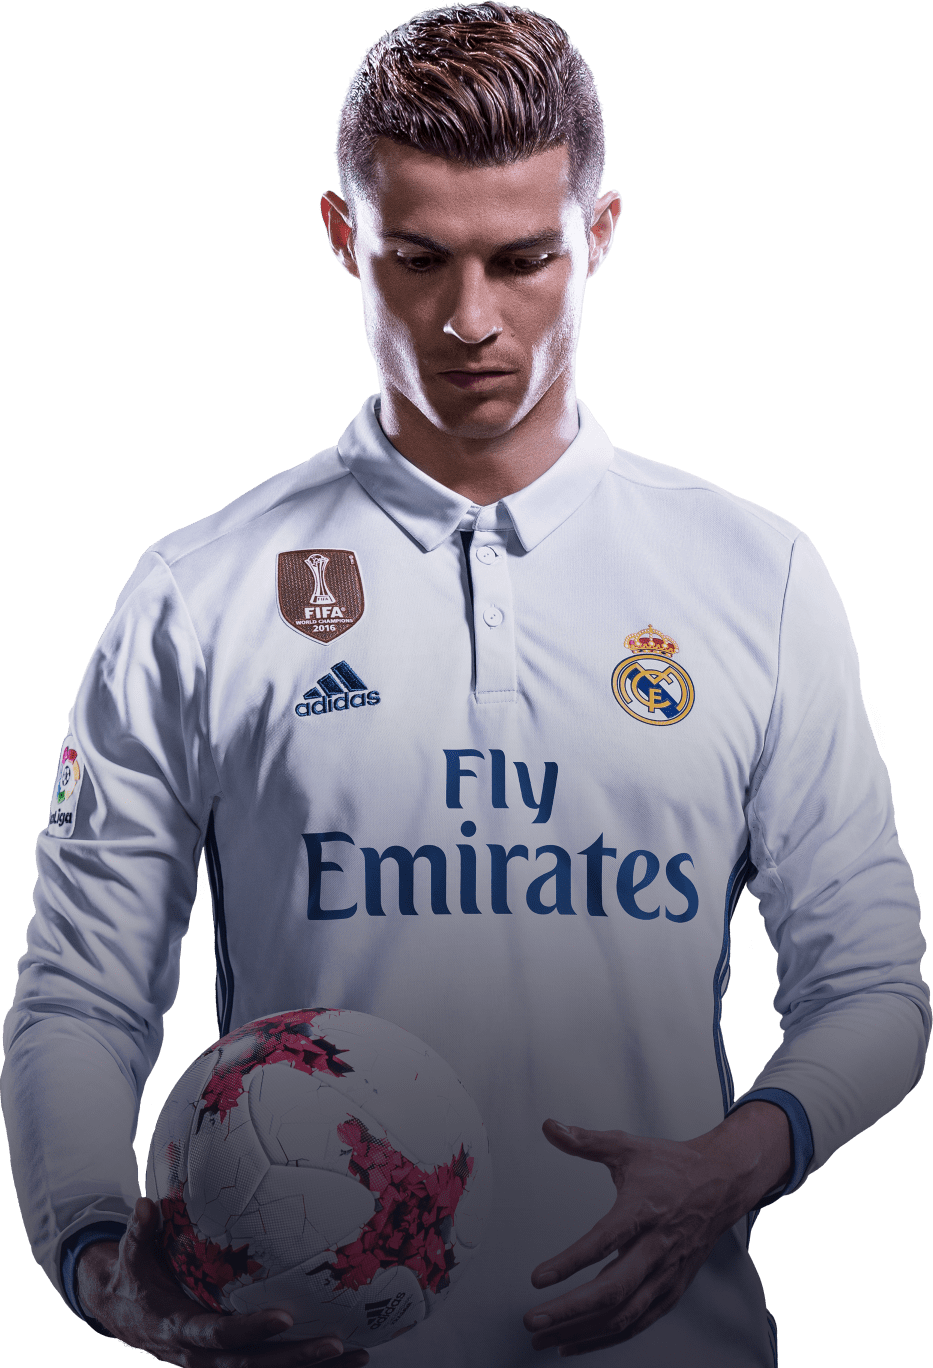 CR7 Stars In FIFA 18 World Cup Mode Trailer - SoccerBible